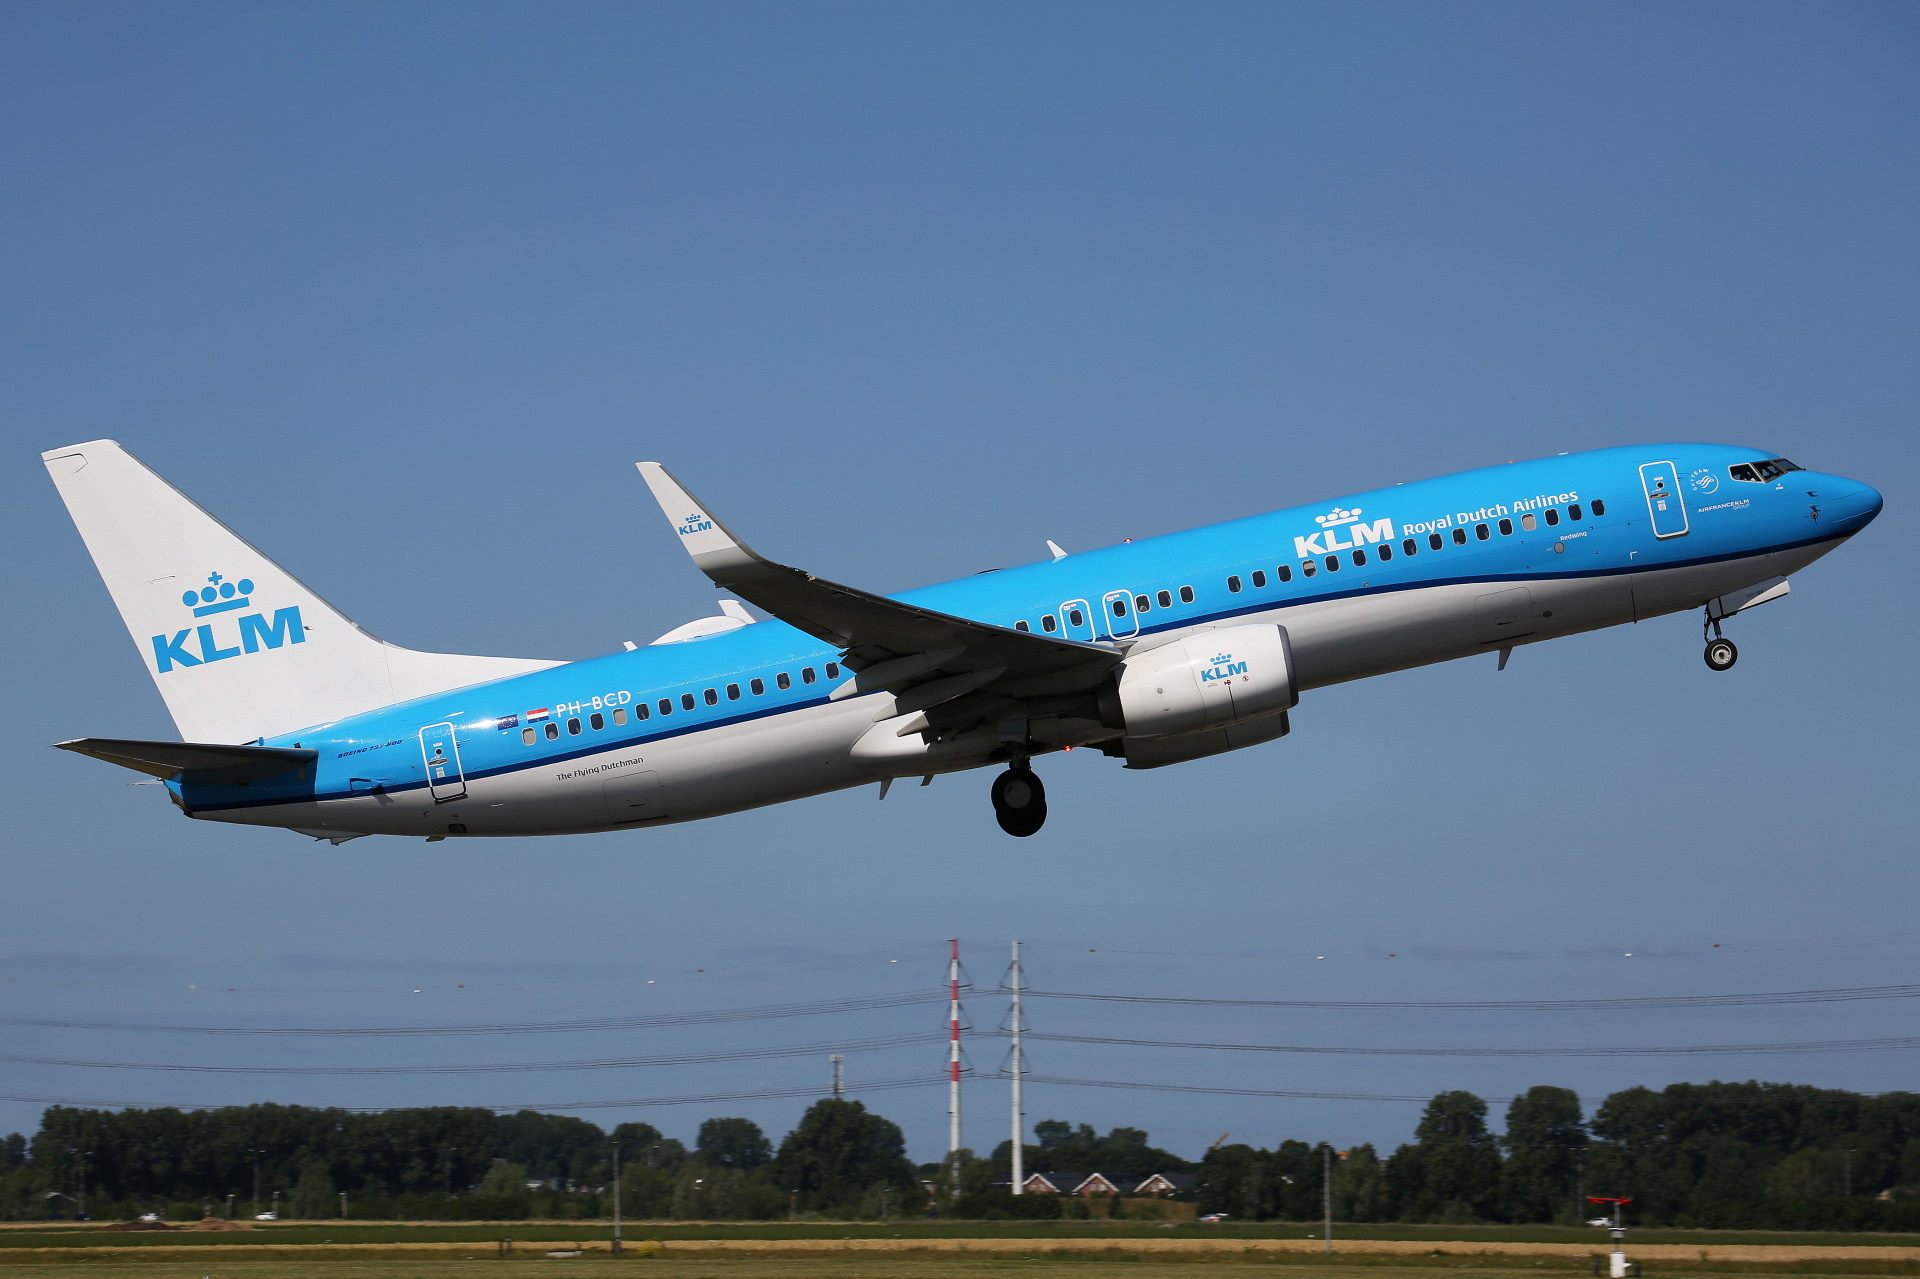 PH-BCD (Aircraft » Schiphol Spotting » Boeing 737-800 » KLM Royal Dutch Airlines)